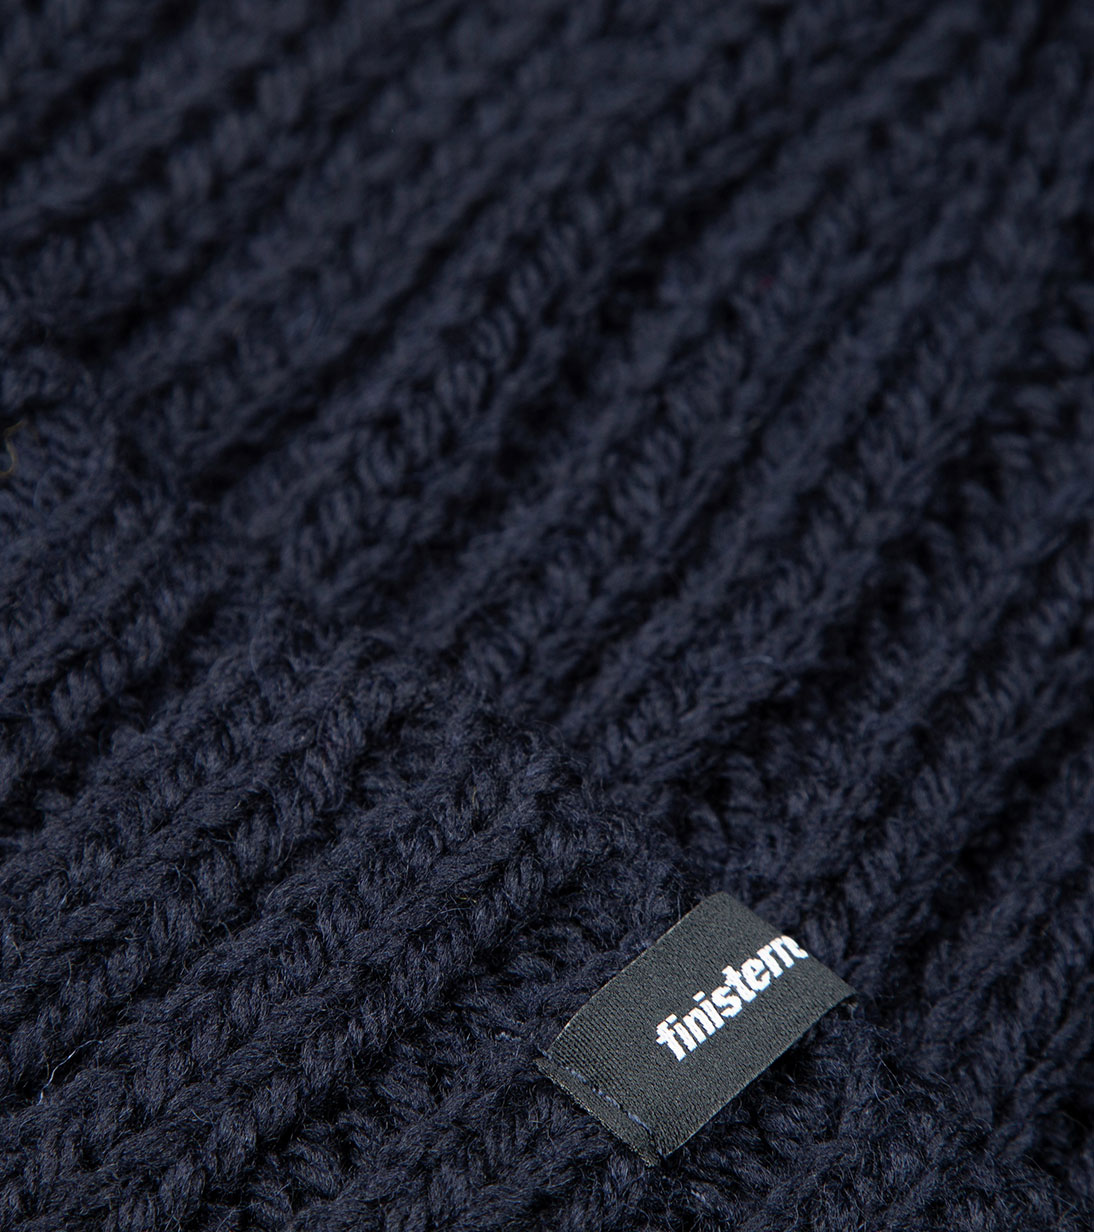 Made from: Donegal Merino Wool